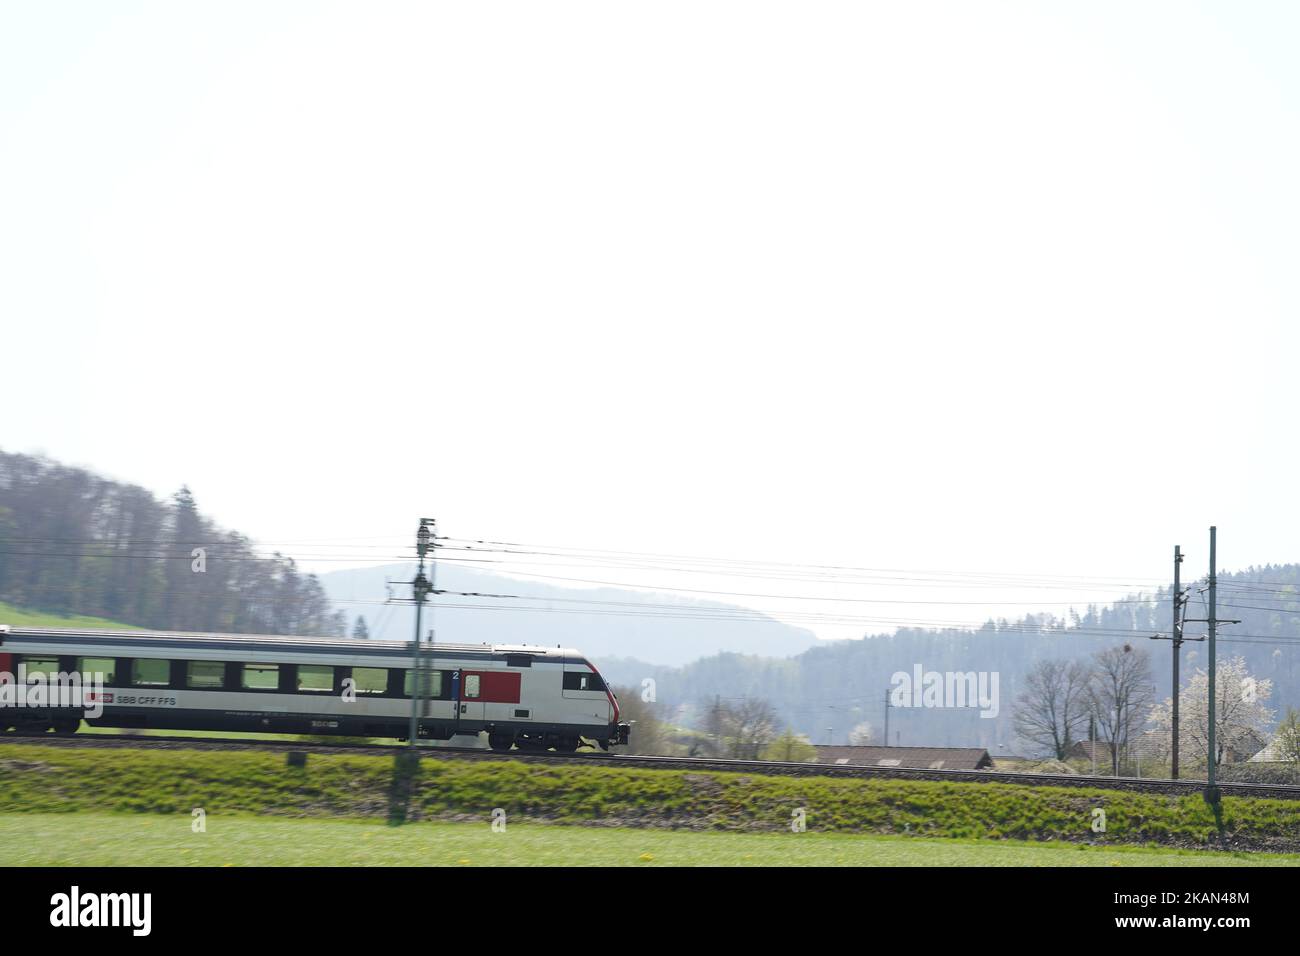 A SBB train driving through the field on the background of mountain forests, Sissach, Switzerland Stock Photo